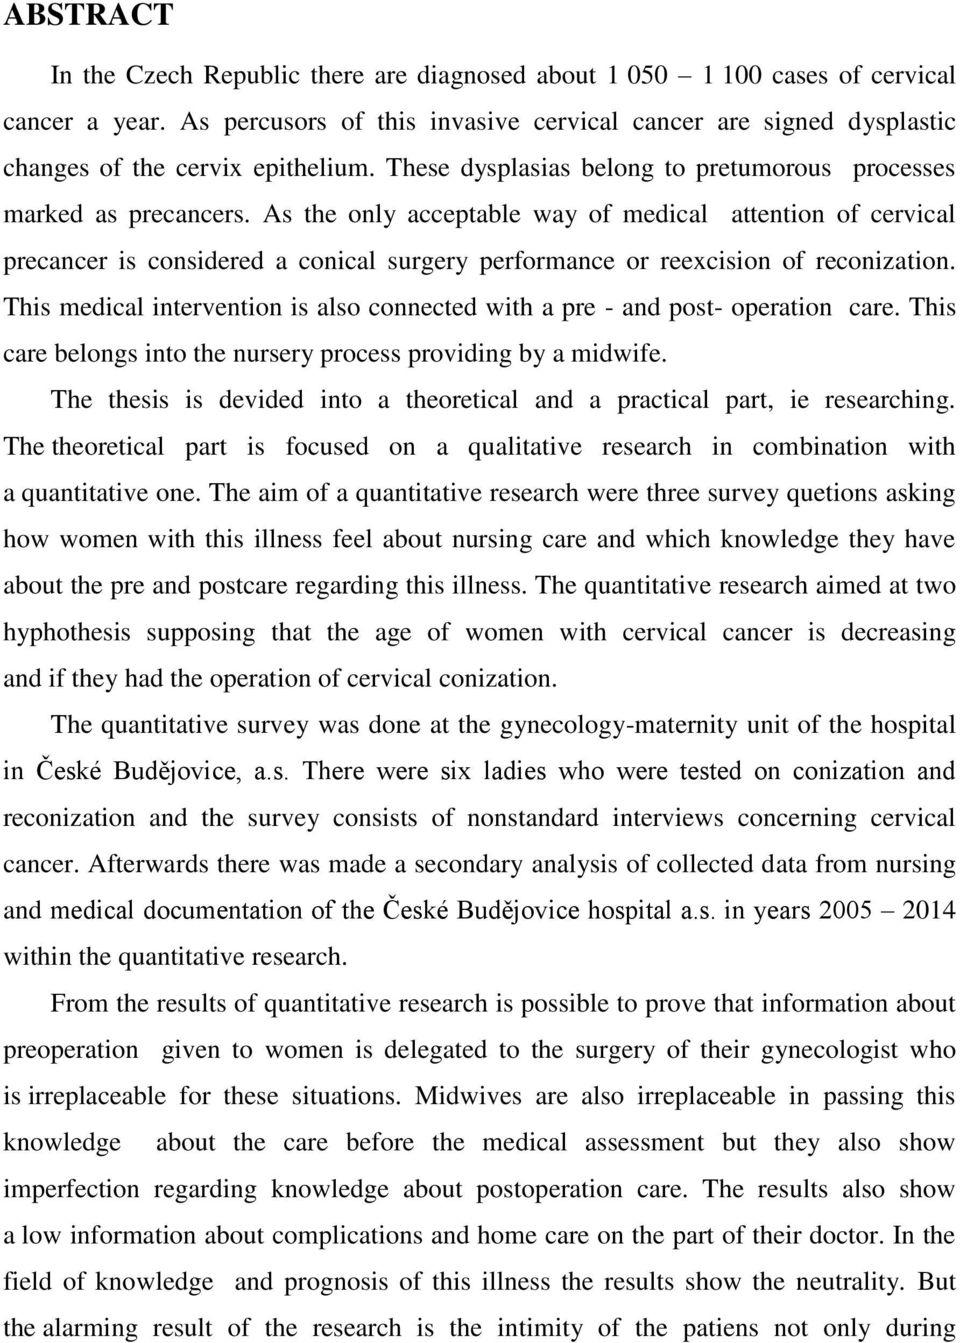 As the only acceptable way of medical attention of cervical precancer is considered a conical surgery performance or reexcision of reconization.